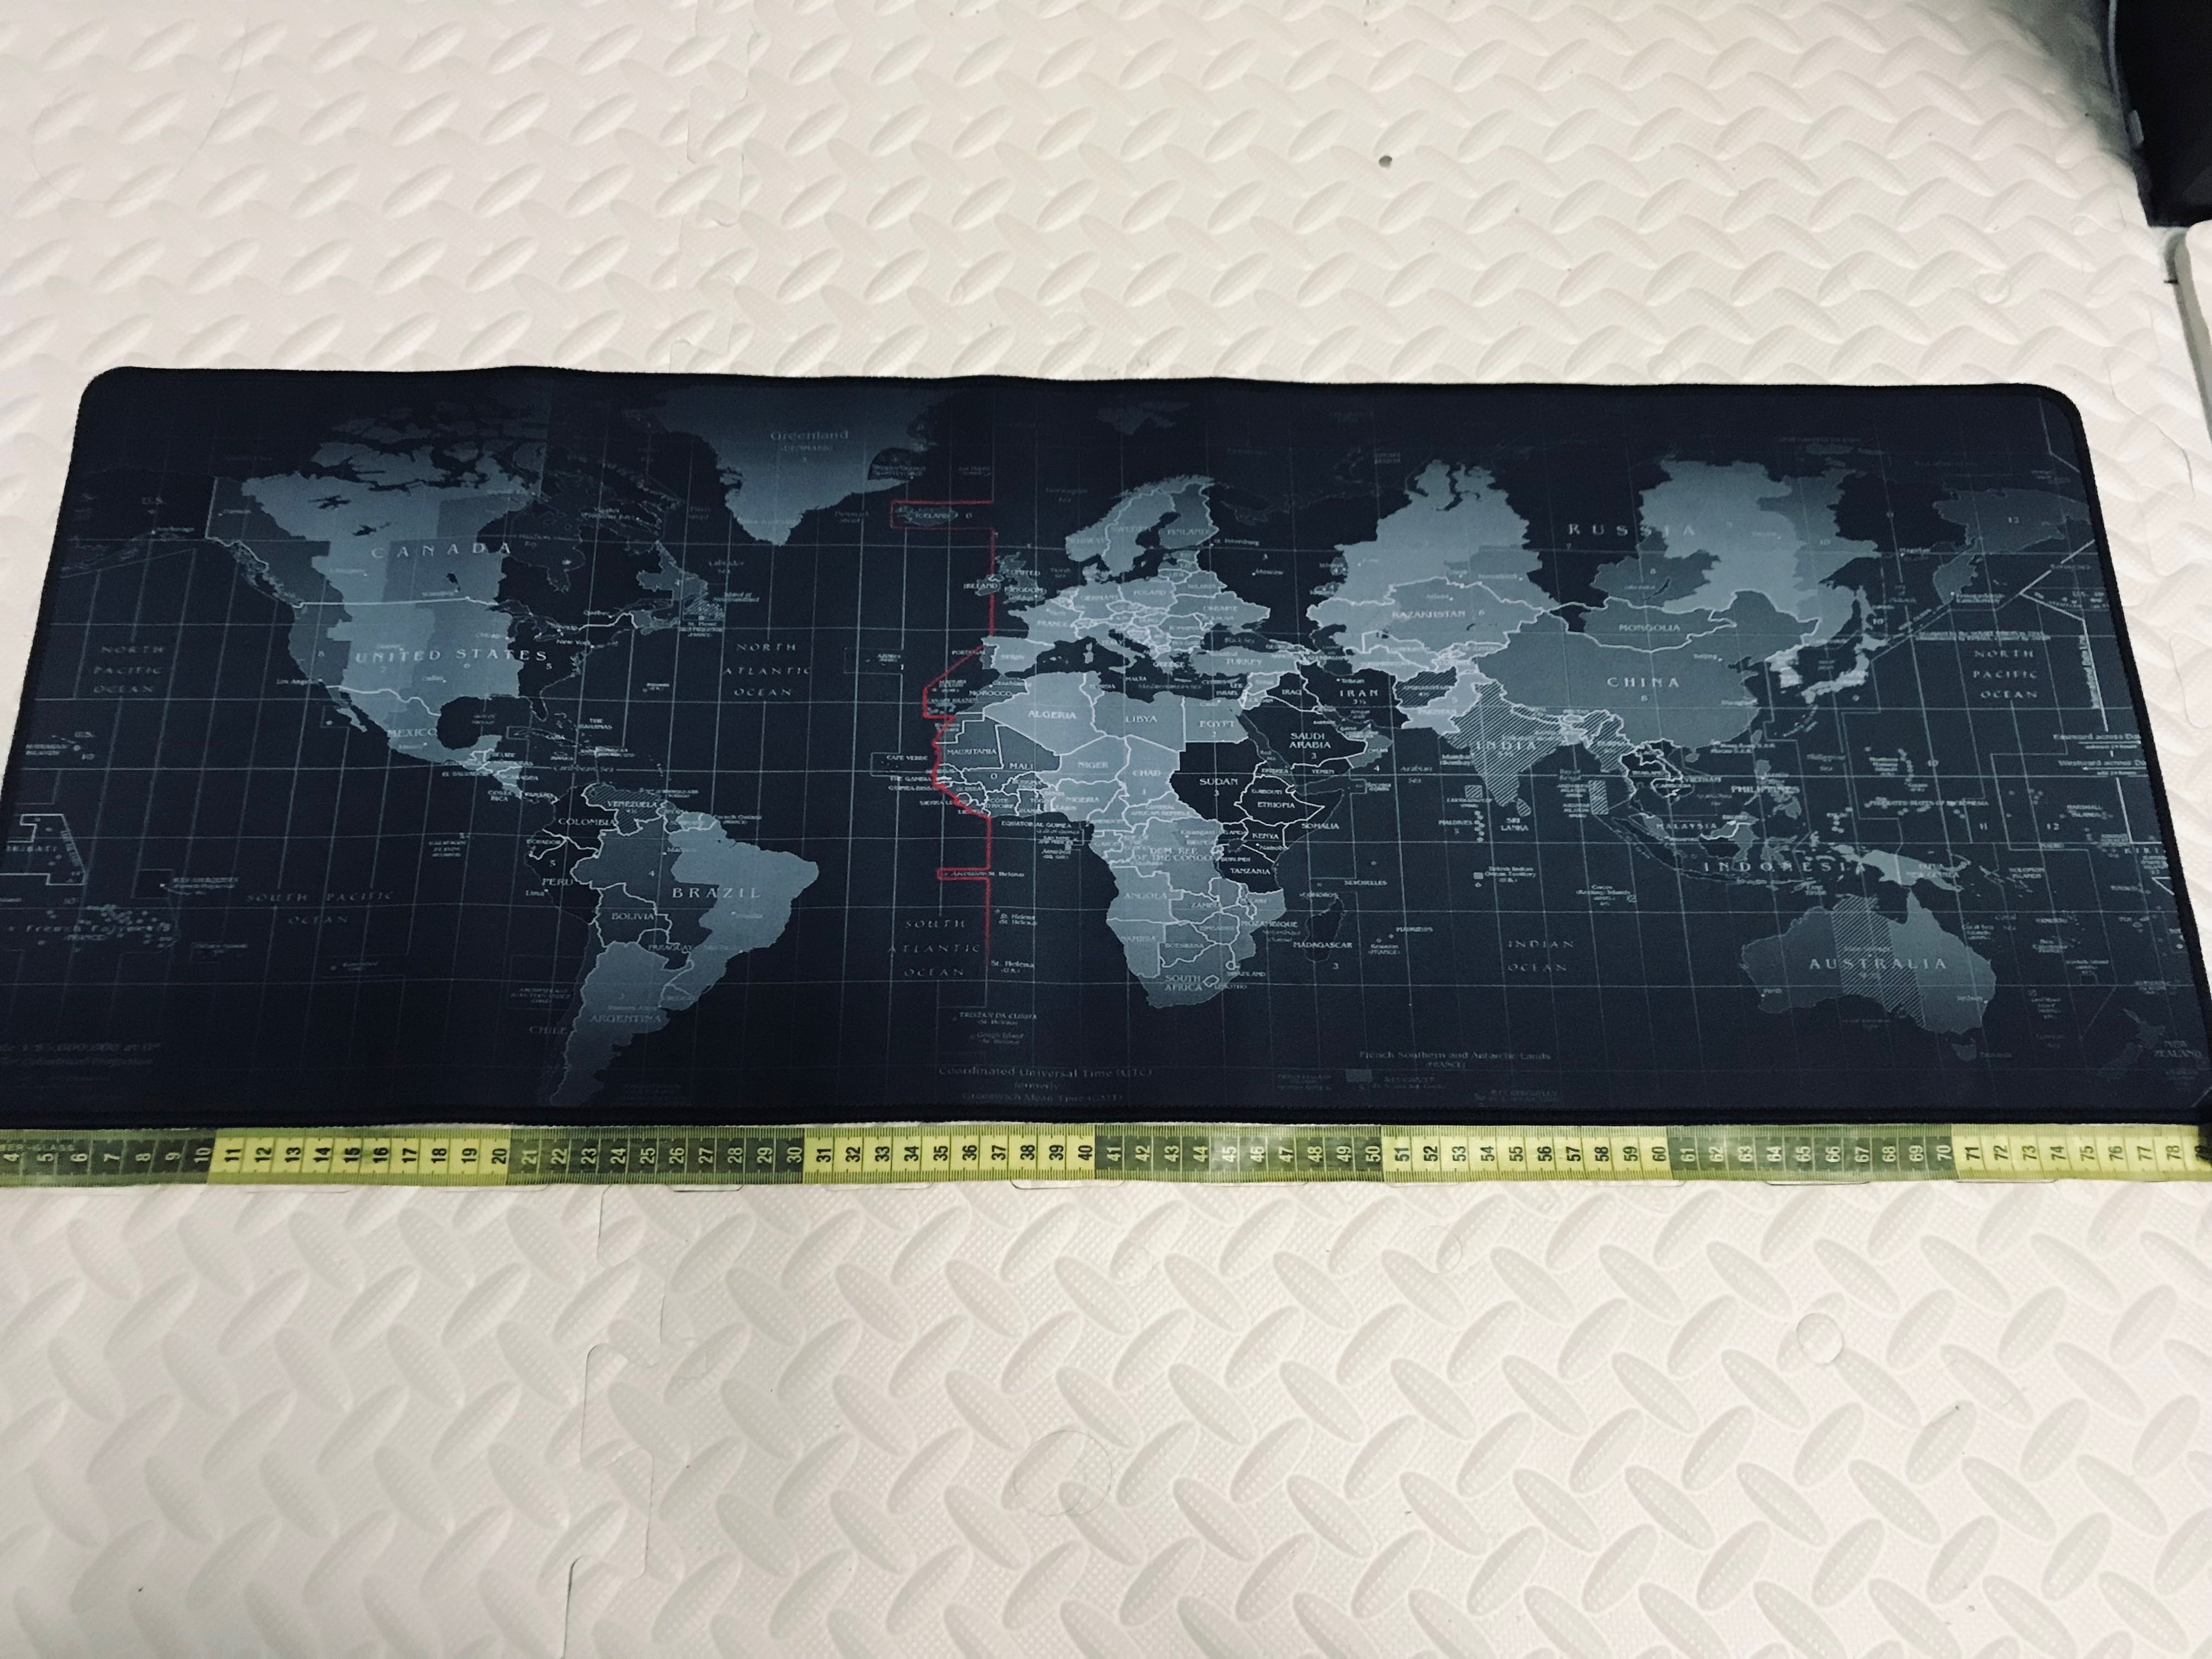 World Map Mouse Pad 1635160912 8c33265f 